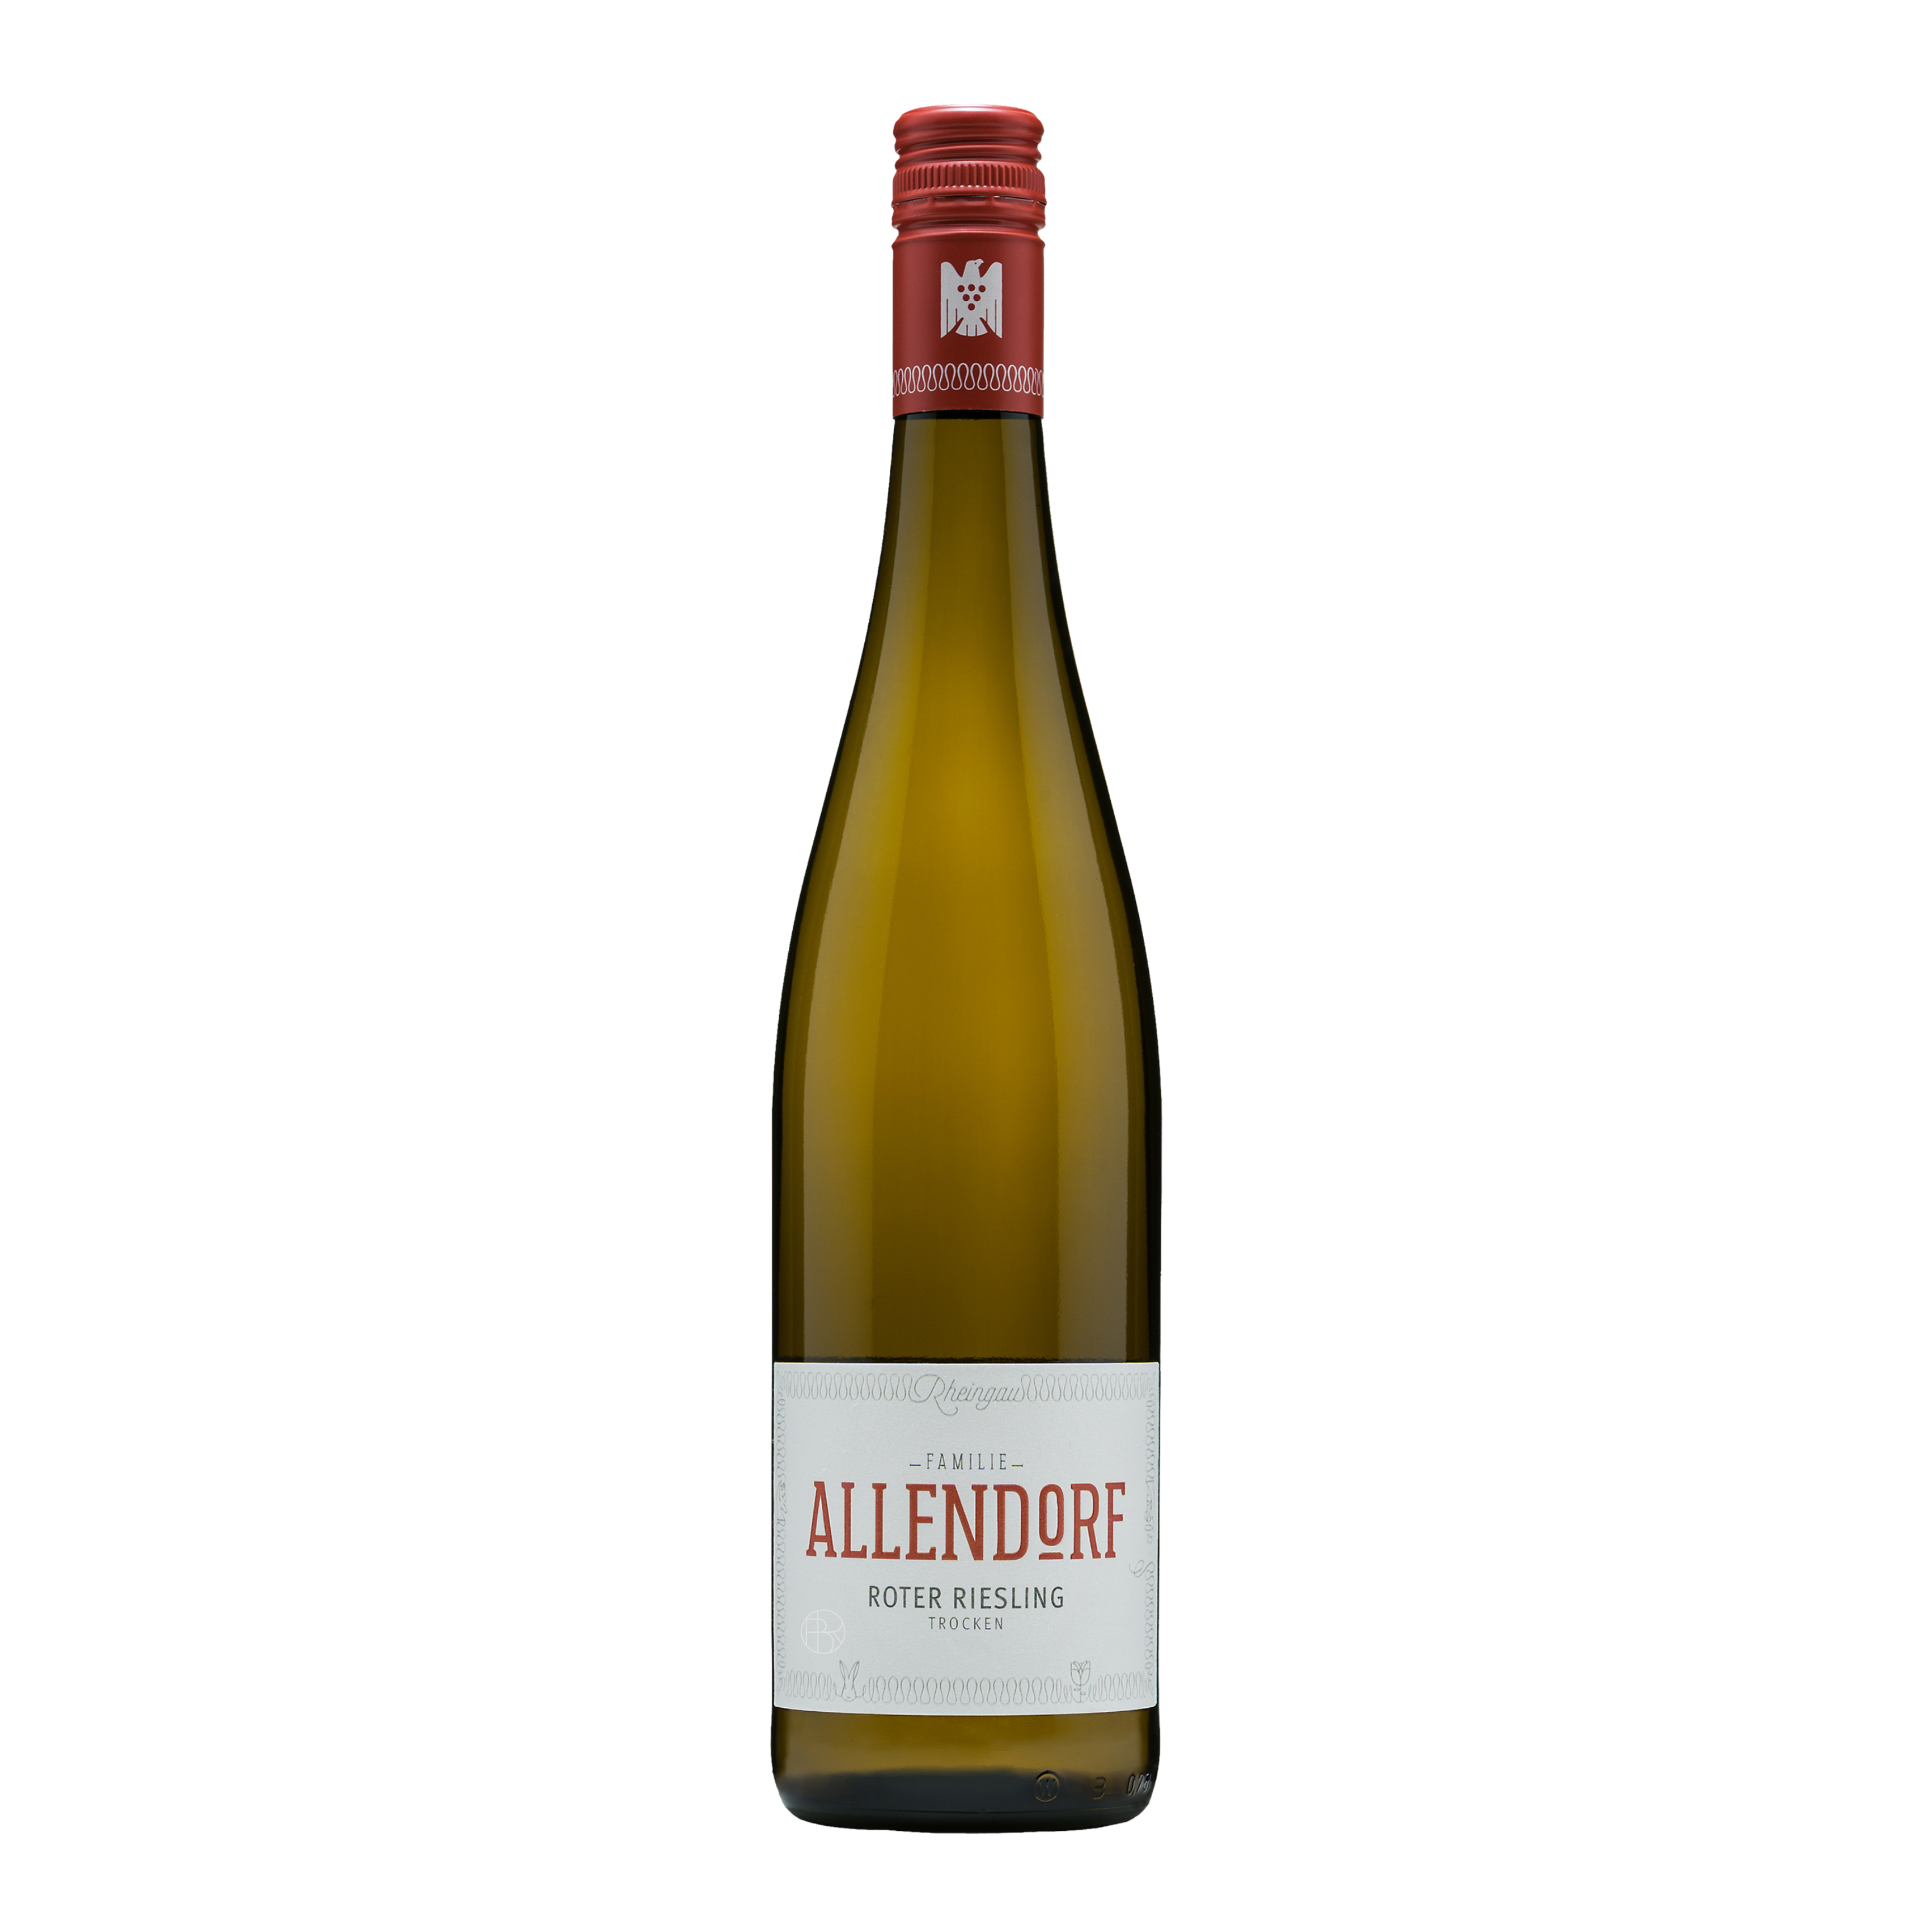 Allendorf Roter Riesling